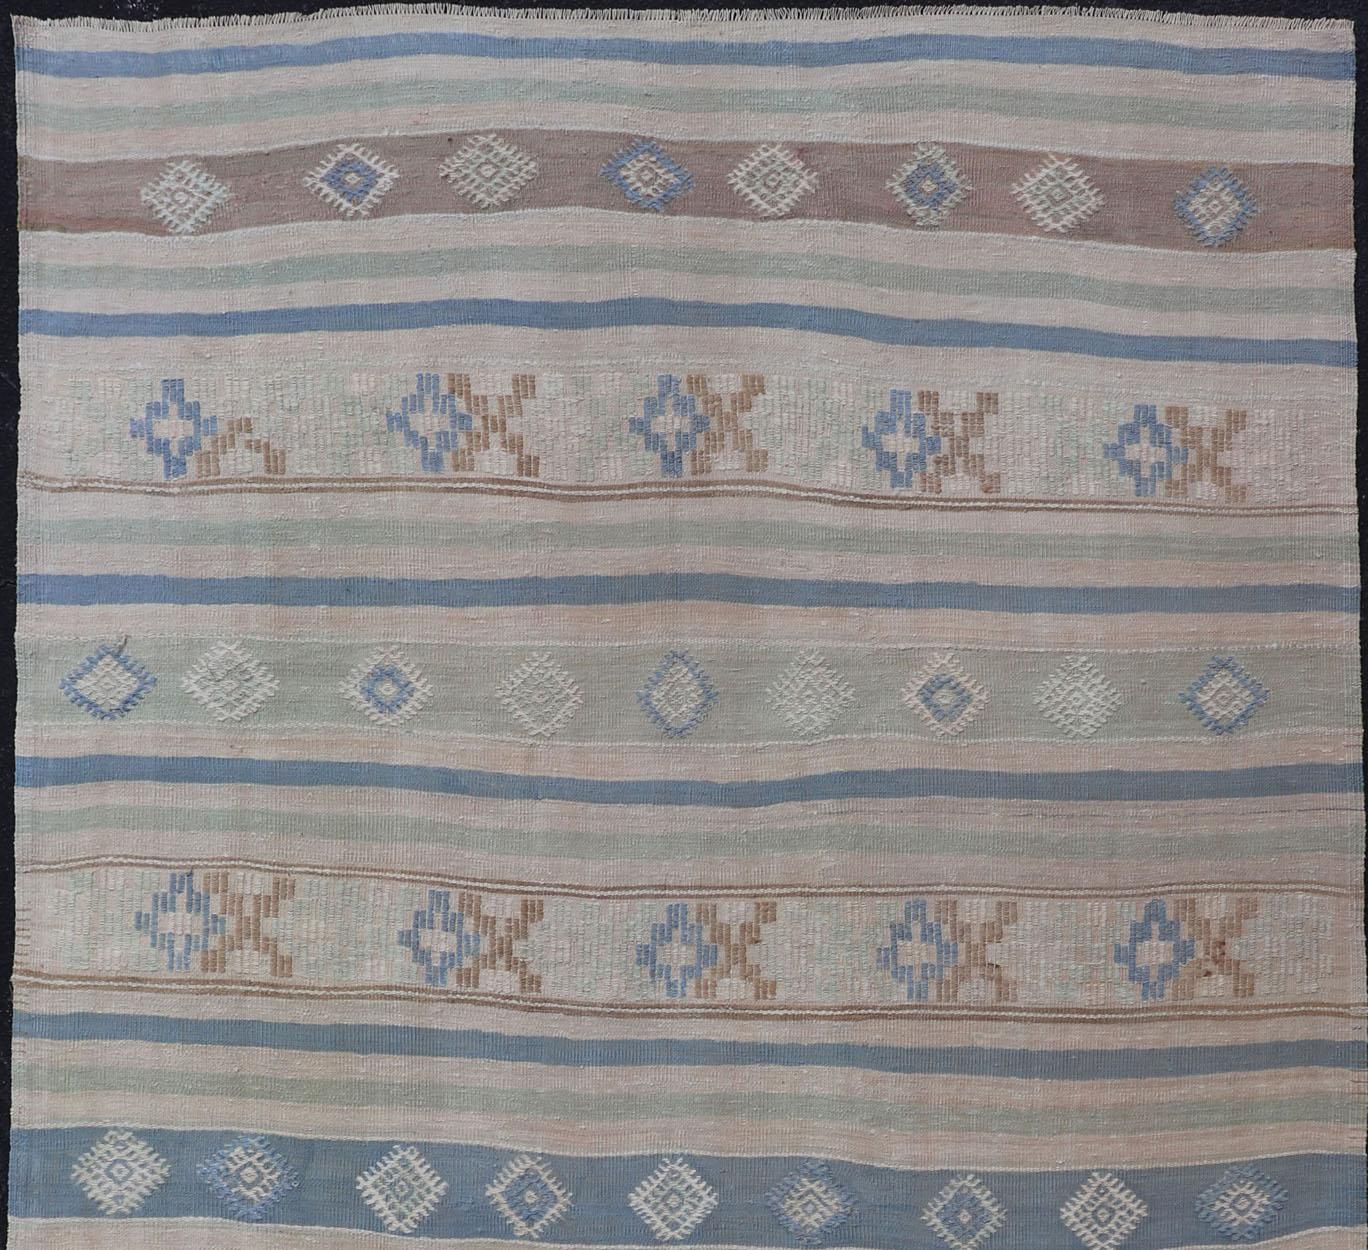 Vintage Turkish Flat-Weave Kilim with Embroideries in Blue, Brown, and Cream In Good Condition For Sale In Atlanta, GA